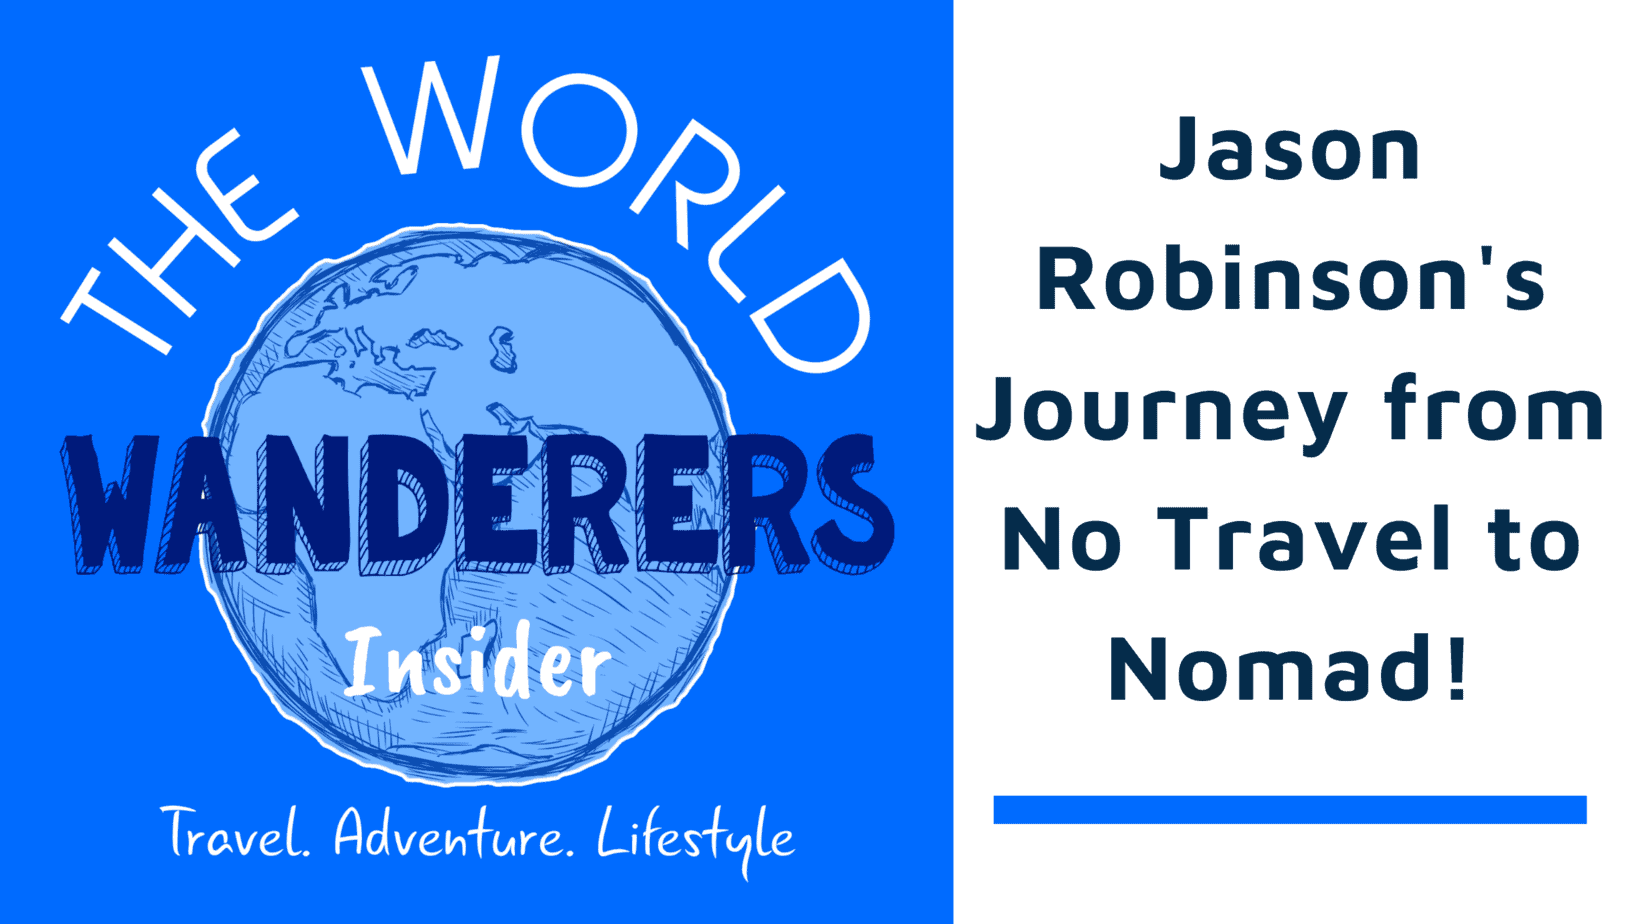 Insider Podcast: Jason Robinson’s Journey from No-Travel to Nomad!